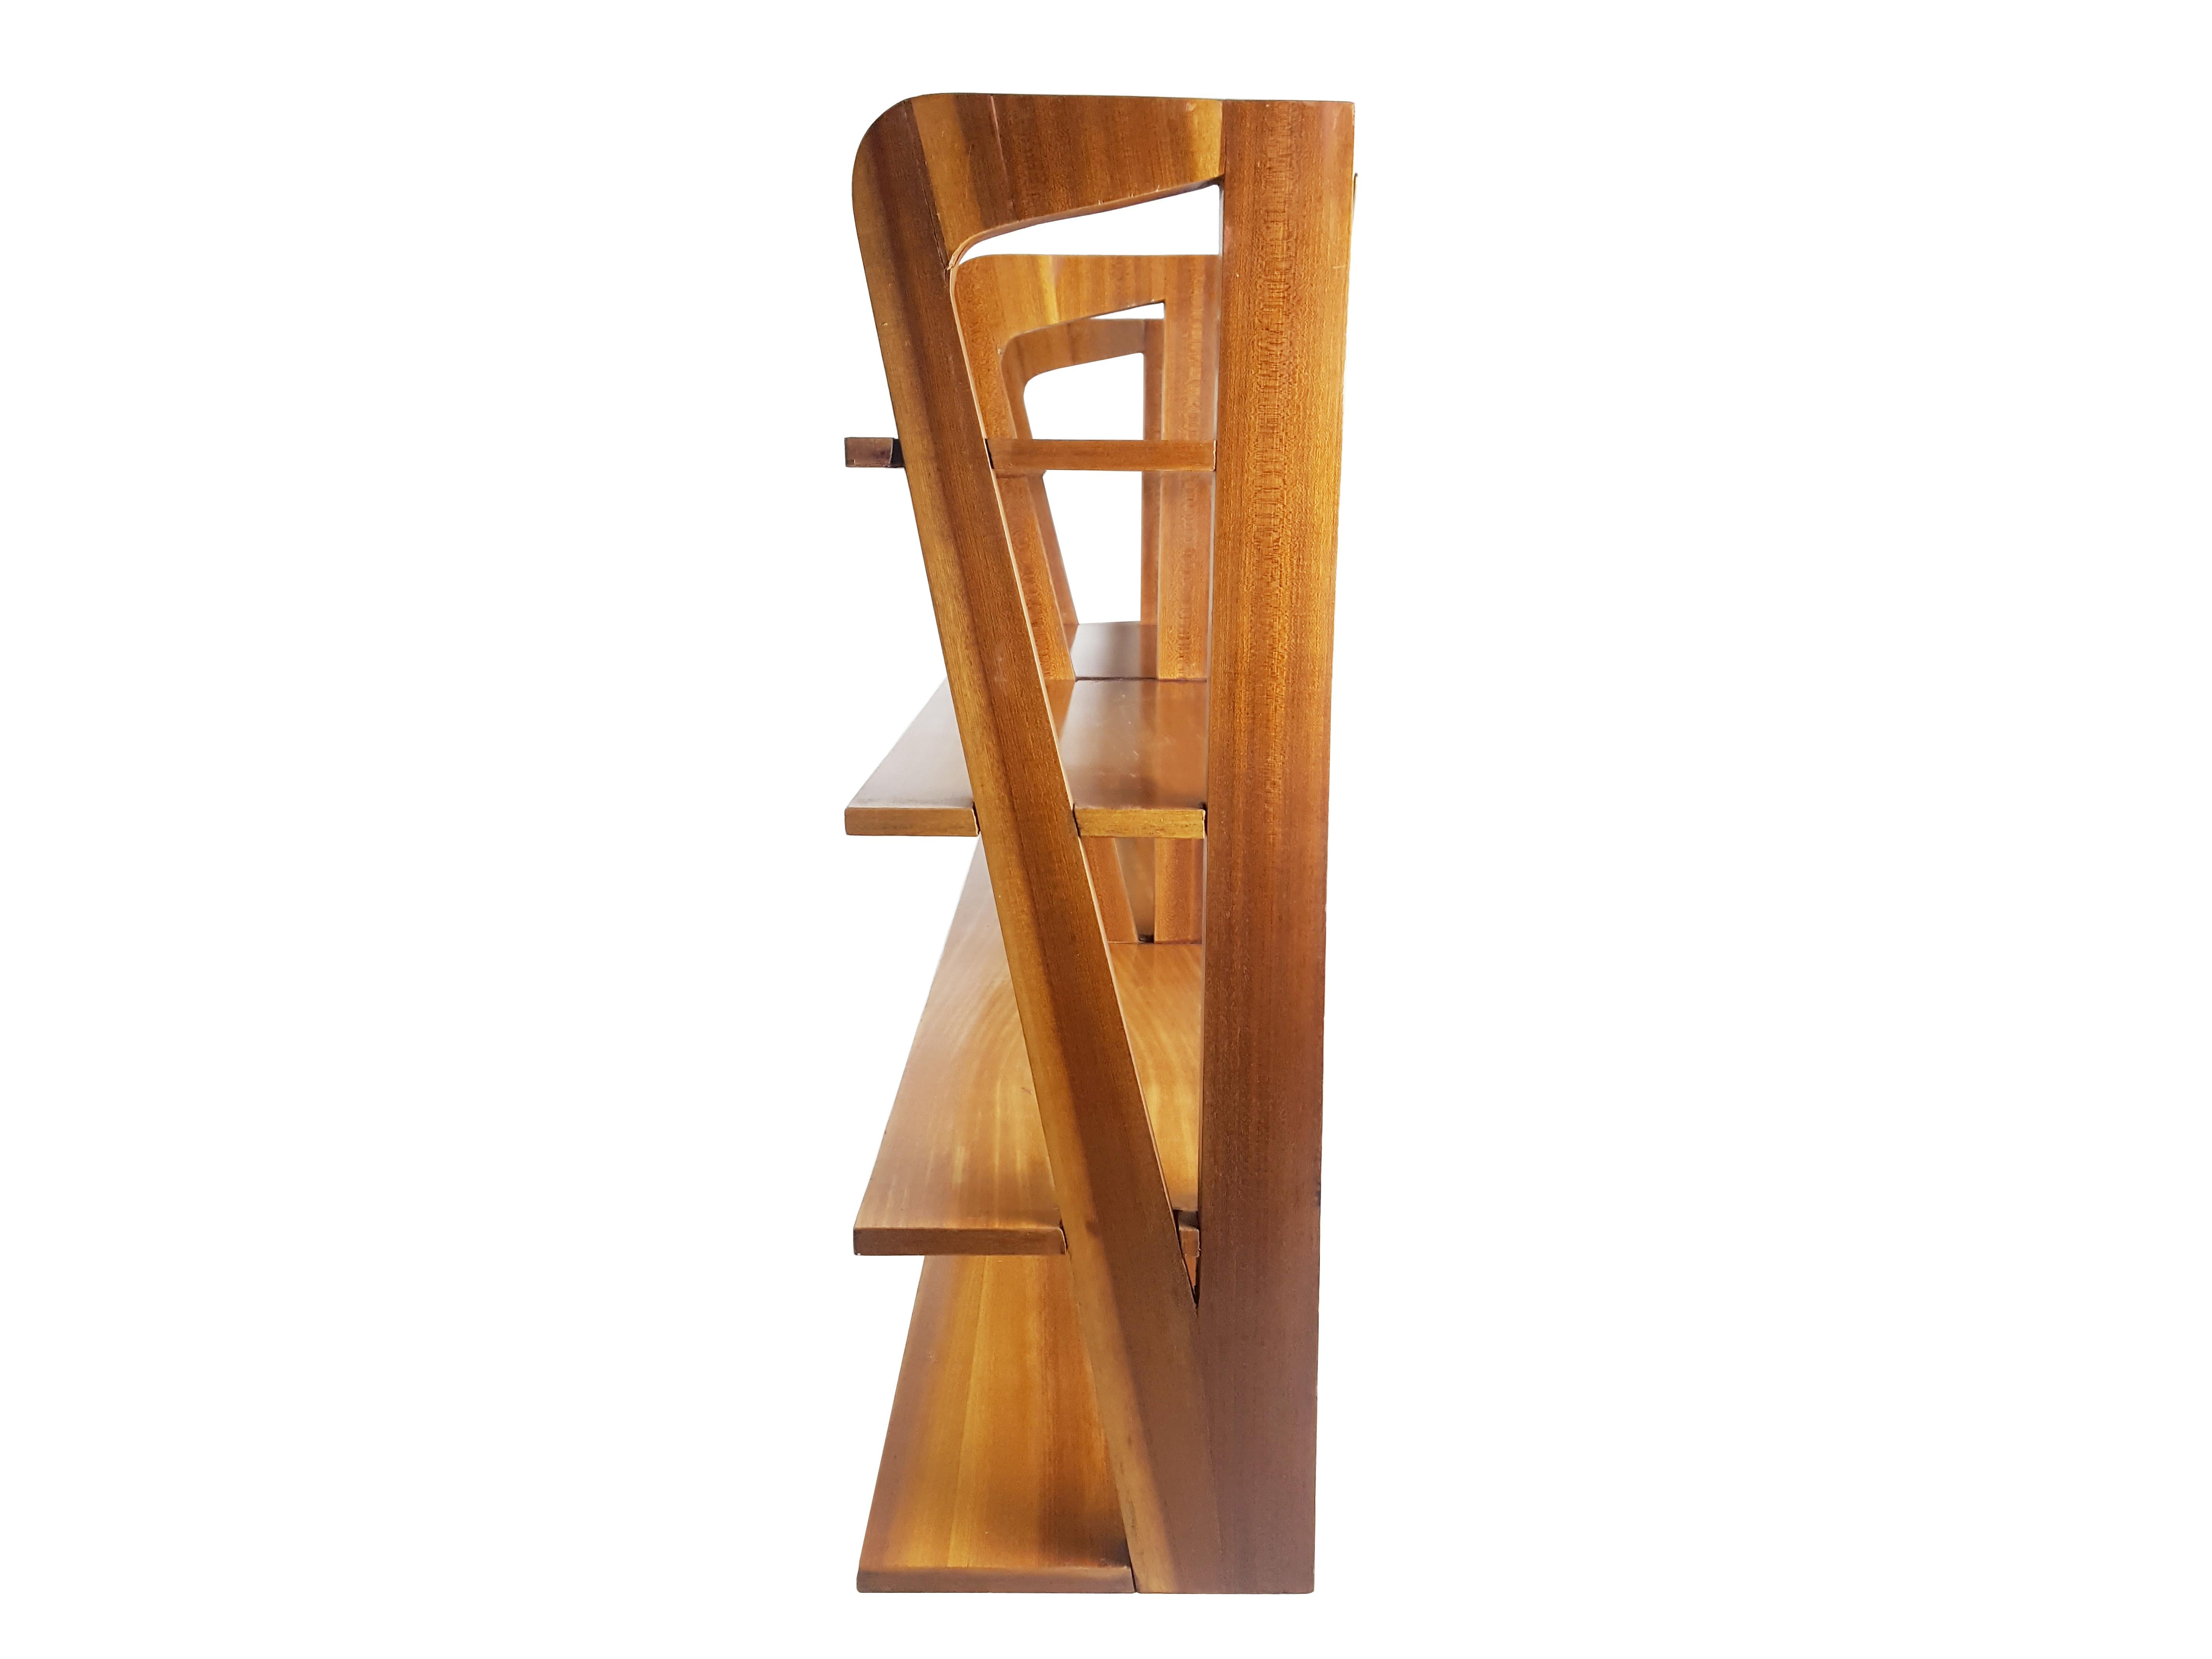 Teak and Brass Midcentury Free Standing Bookshelf Attributed to ISA For Sale 6